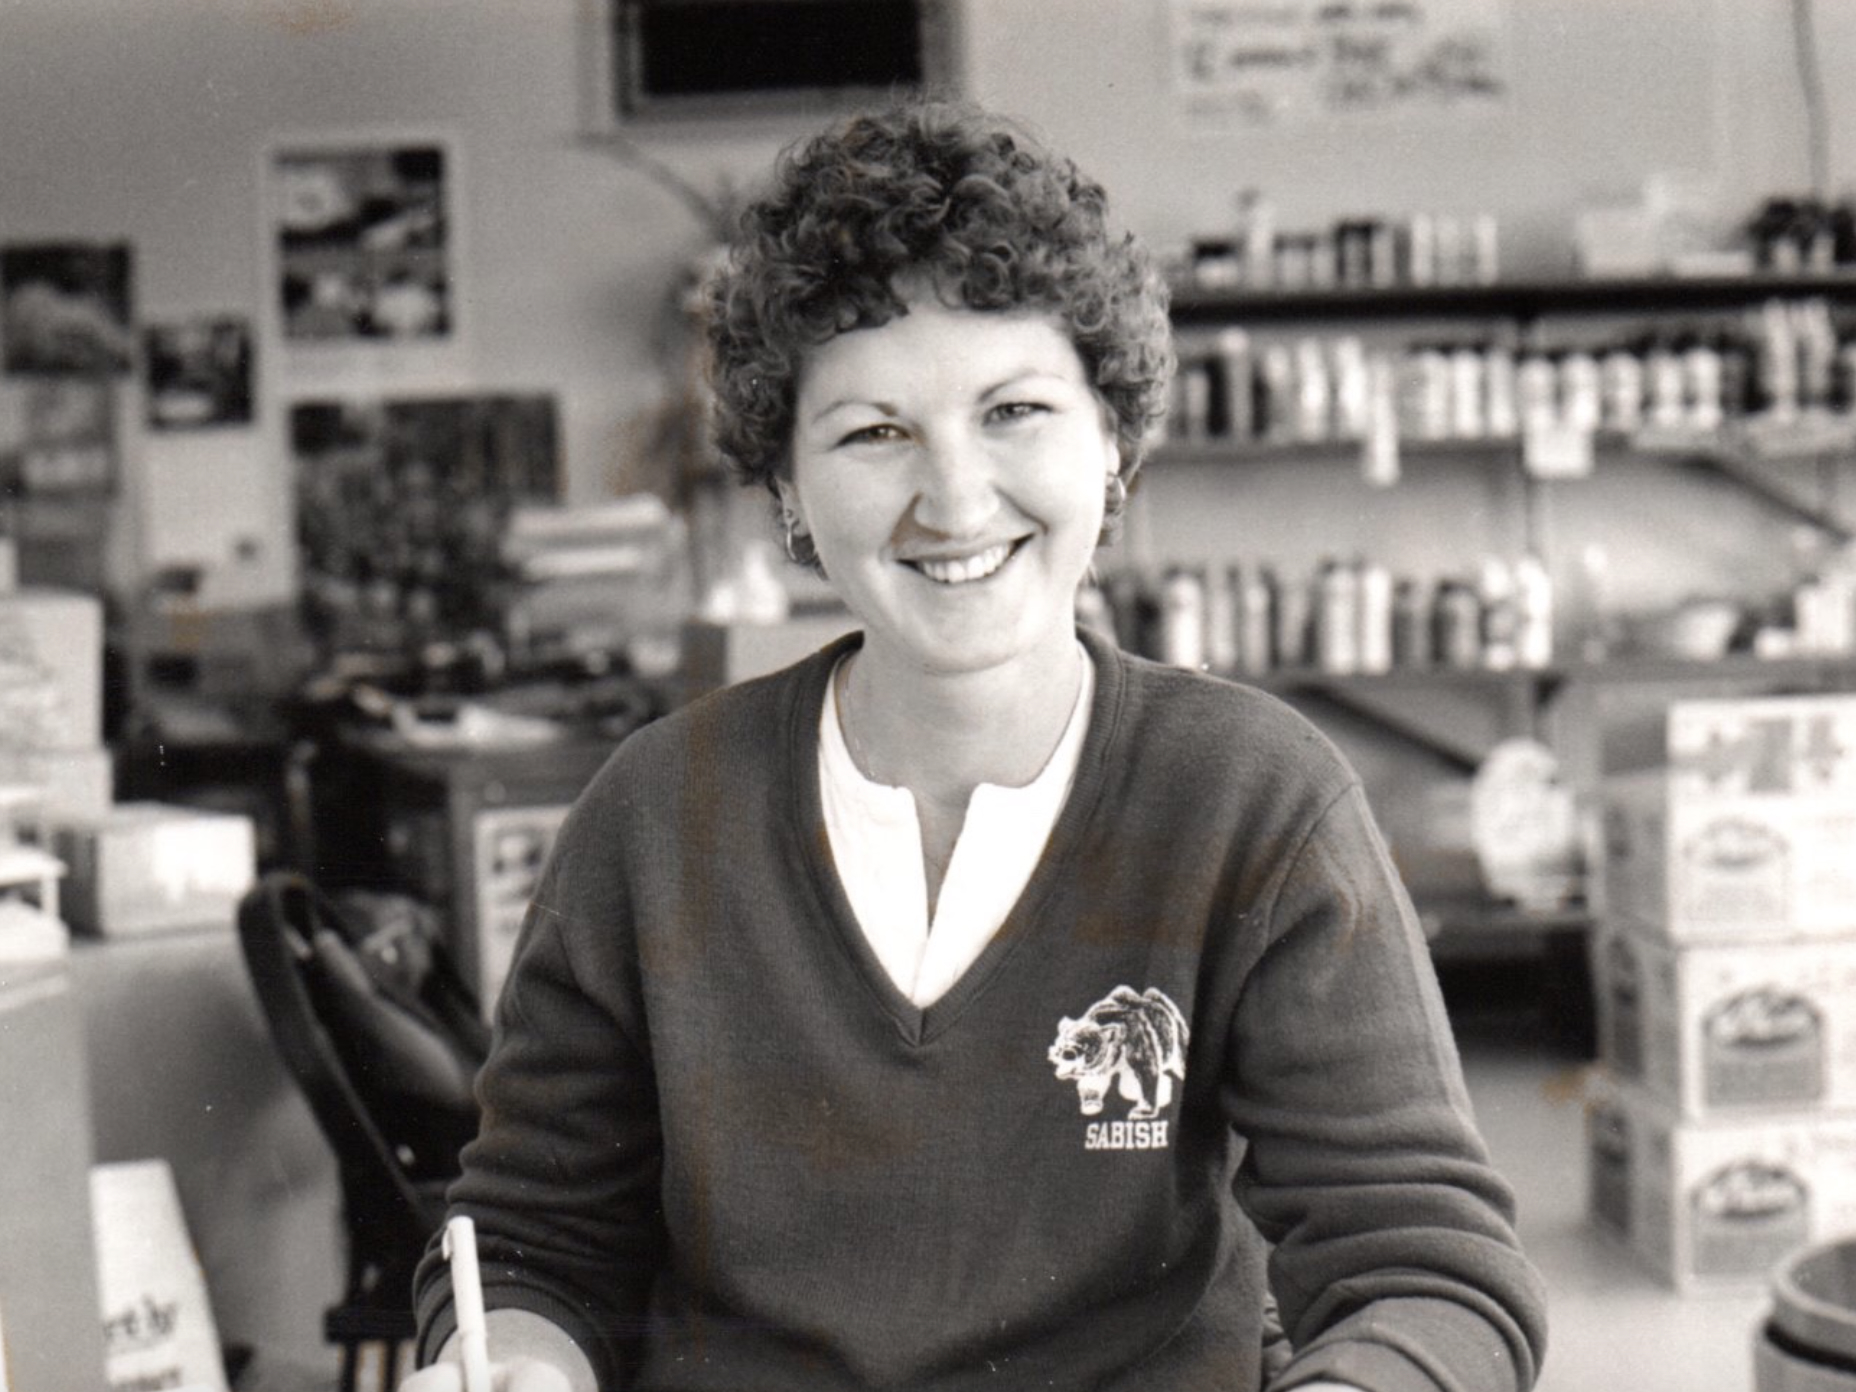 Pam Mehnert during her early years at the co-op